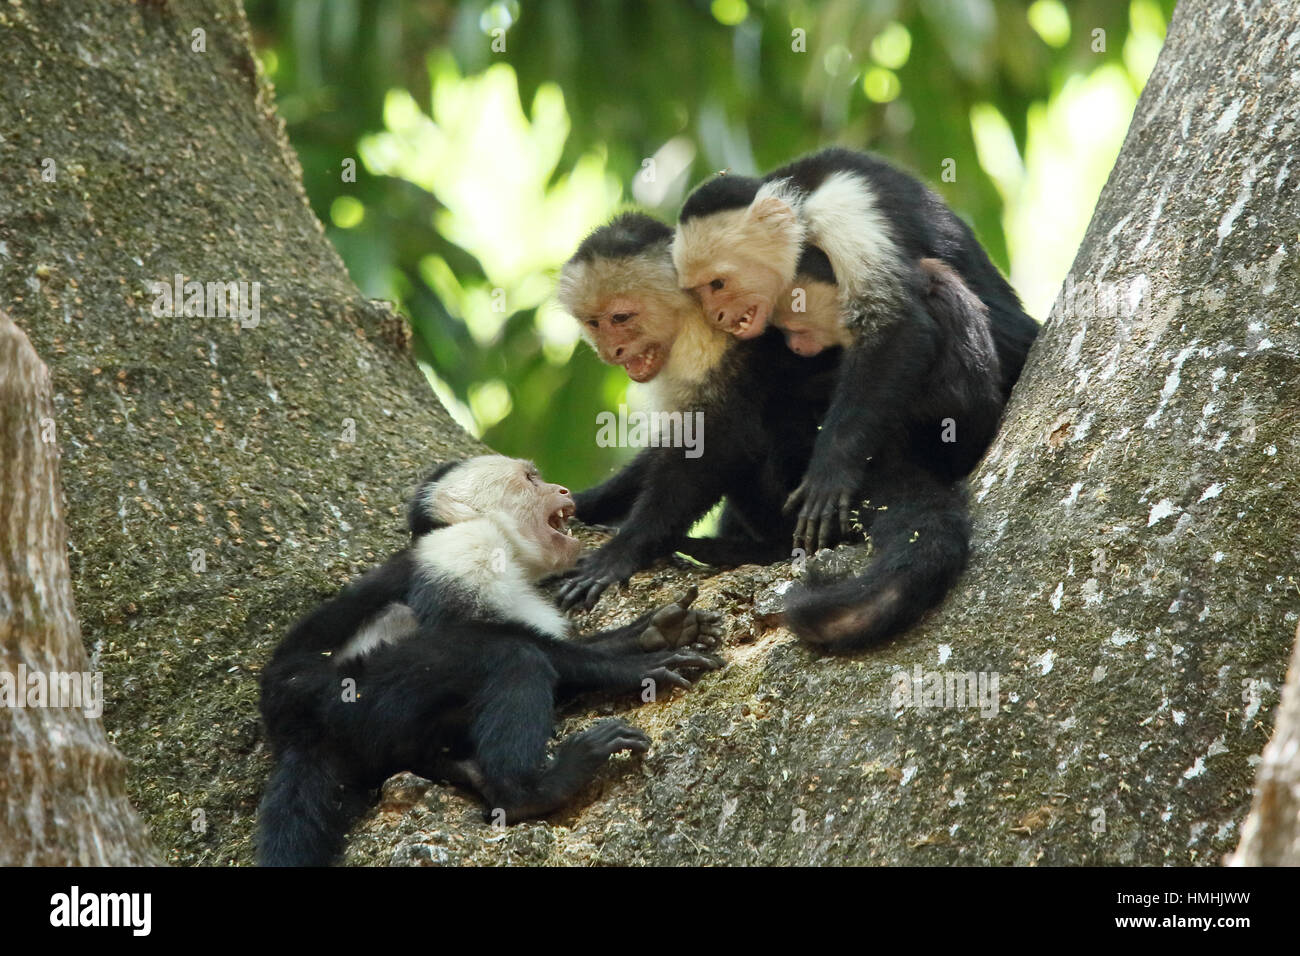 White-faced capuchin monkeys (cebus capucinus). Aggression between troup members. Palo Verde National Park, Guanacaste, Costa Rica. Stock Photo